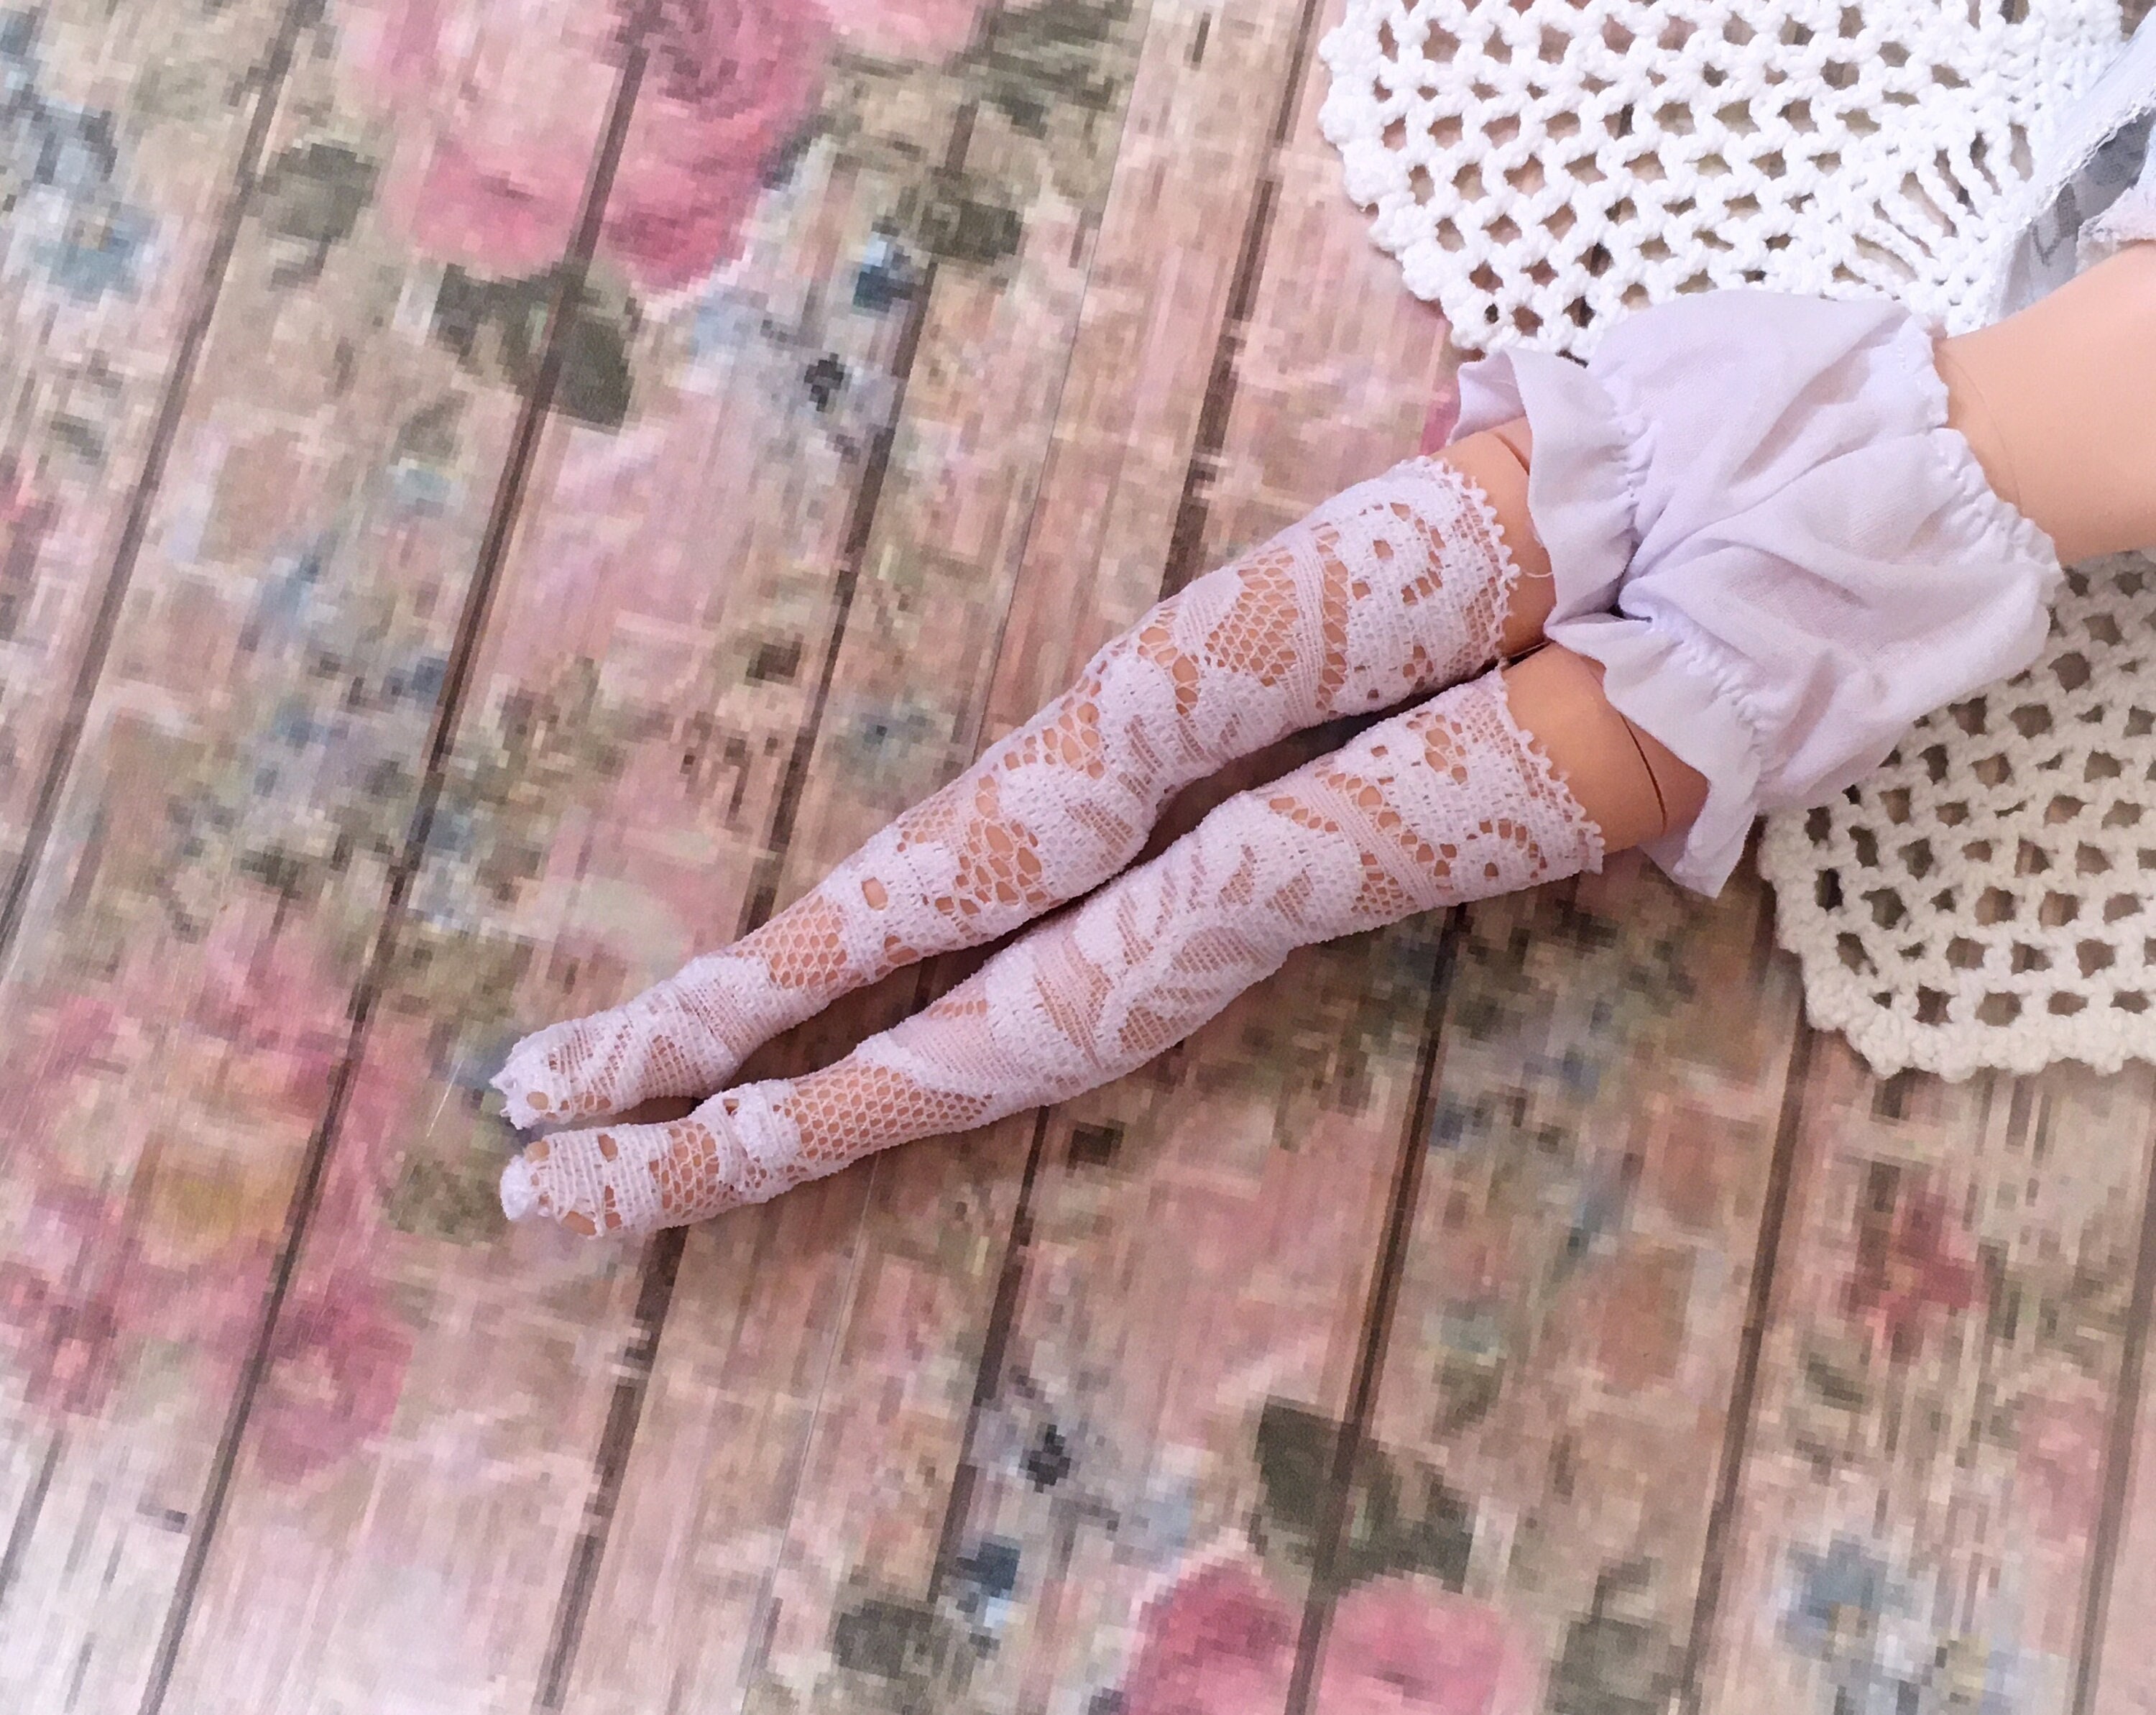 Buy White Lace Stockings Online In India -  India